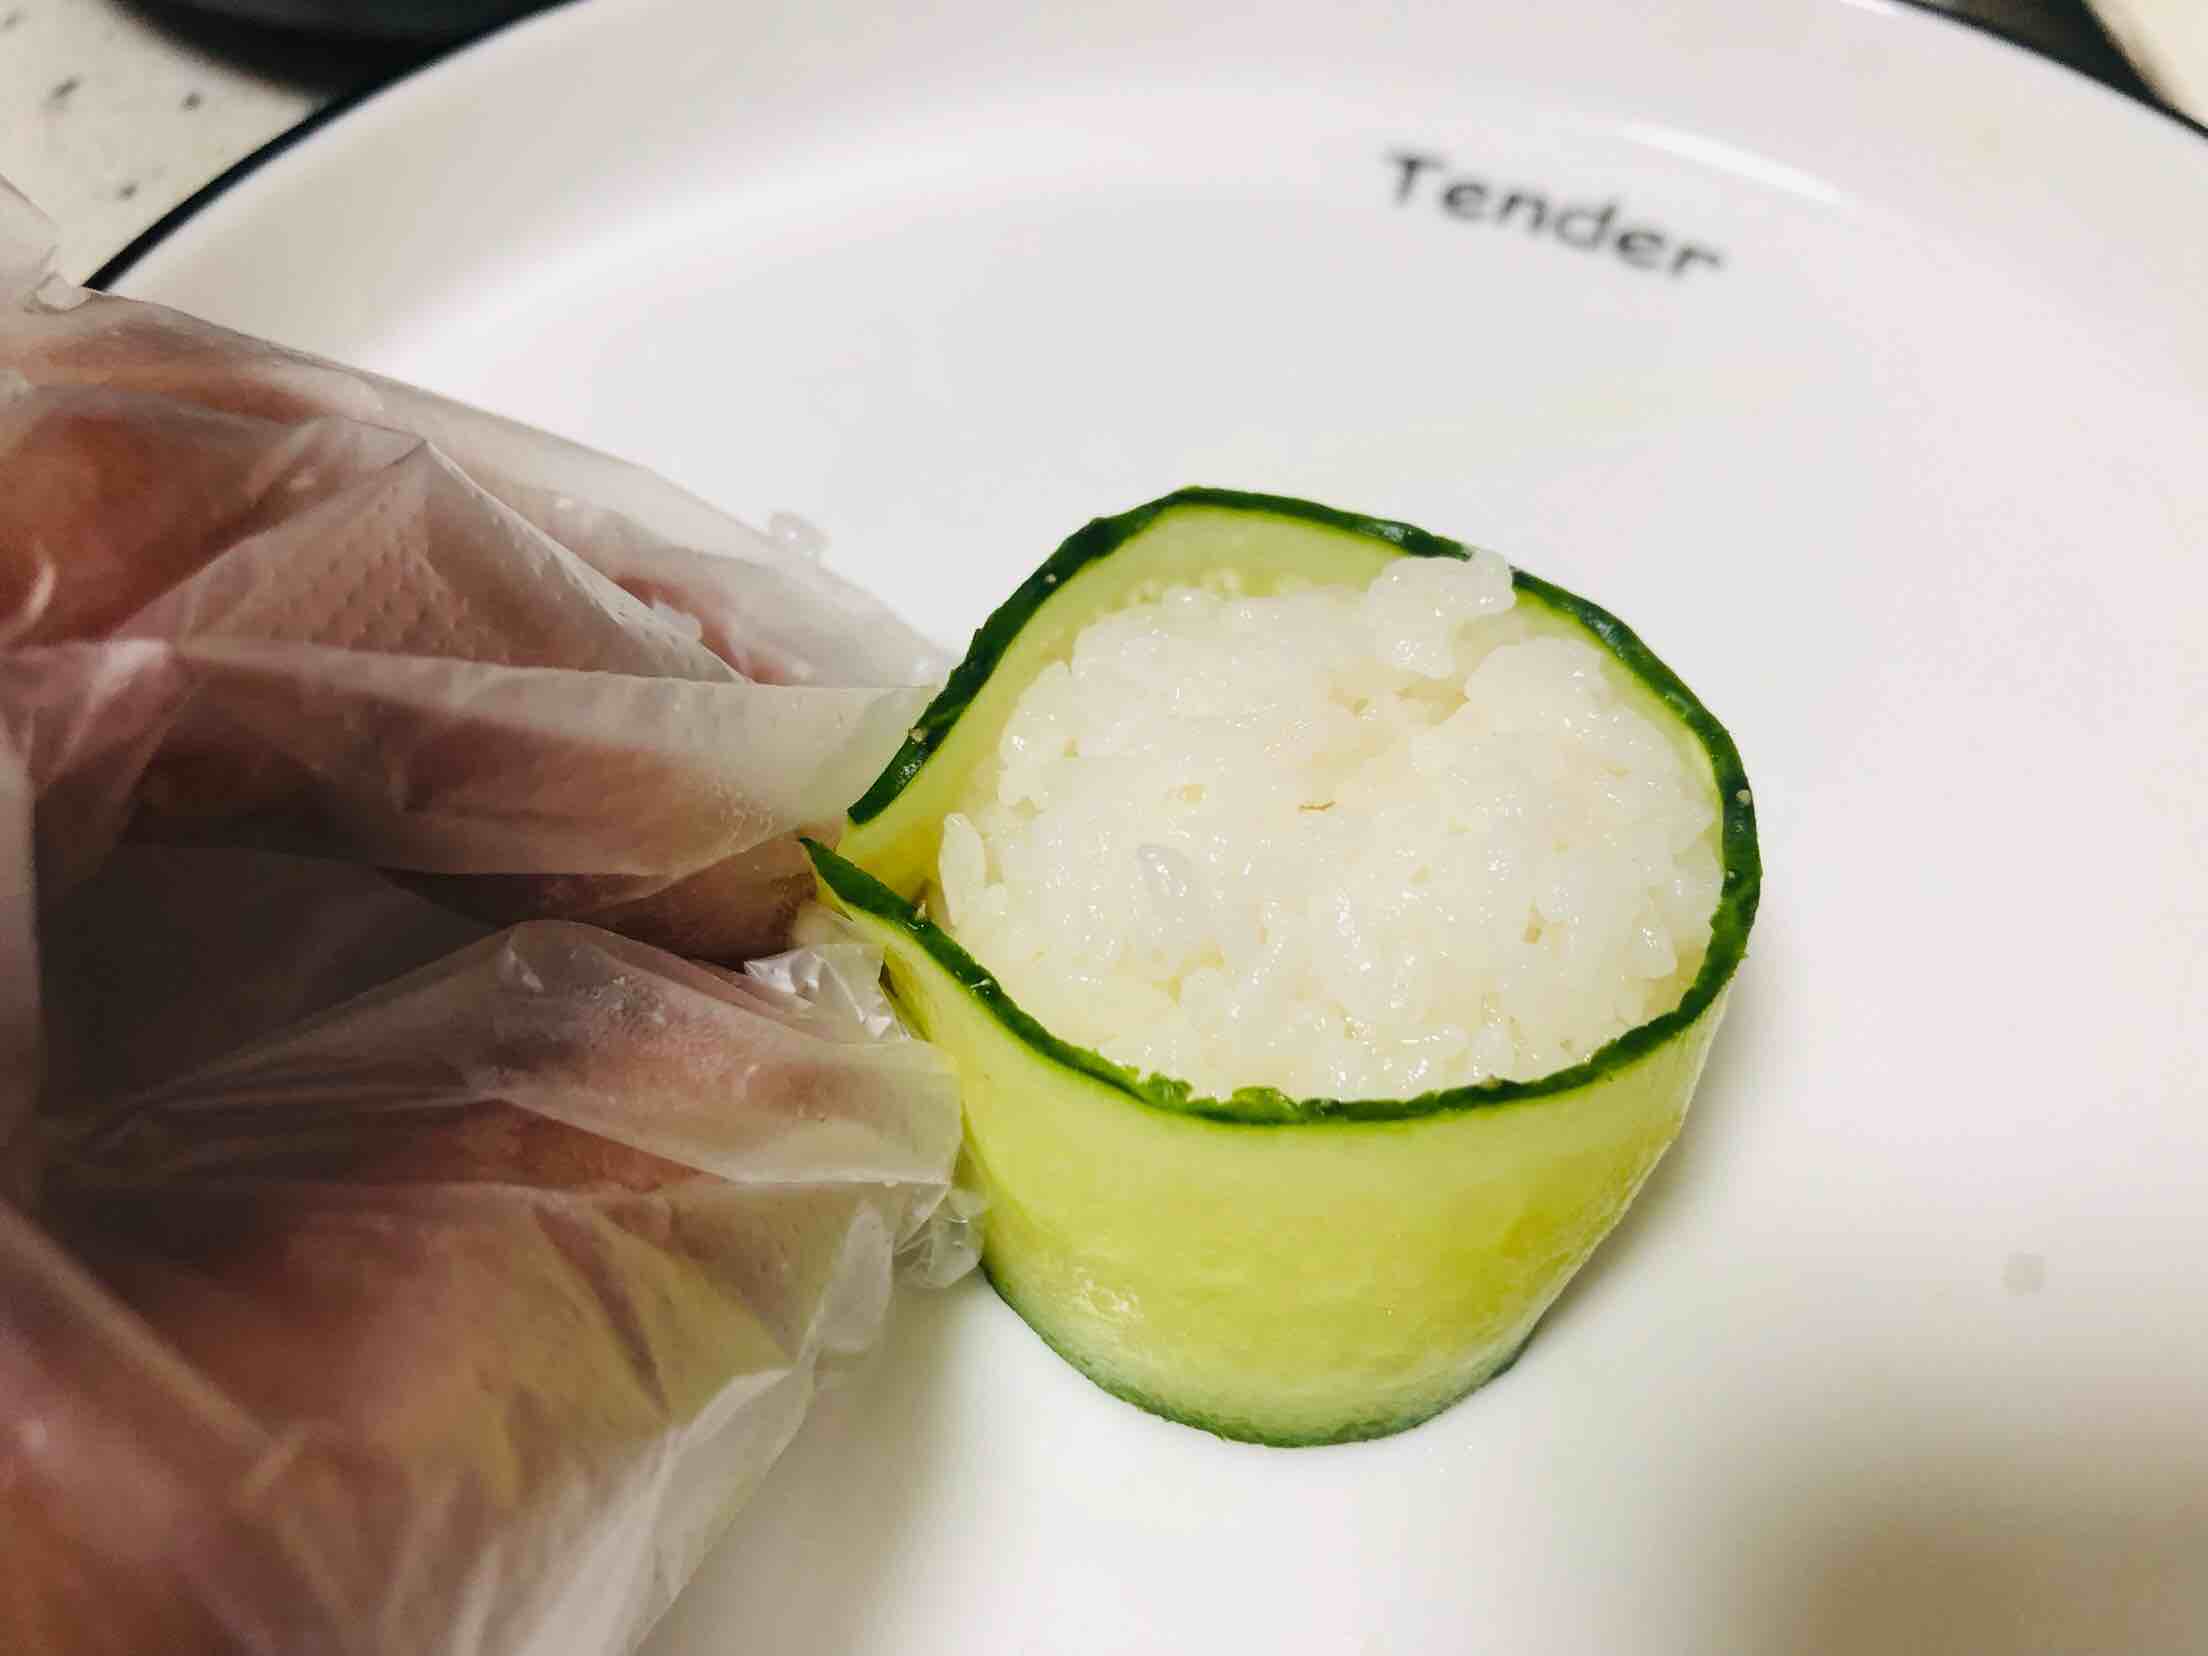 Cucumber Rolled Rice Balls with Pineapple Sauce recipe